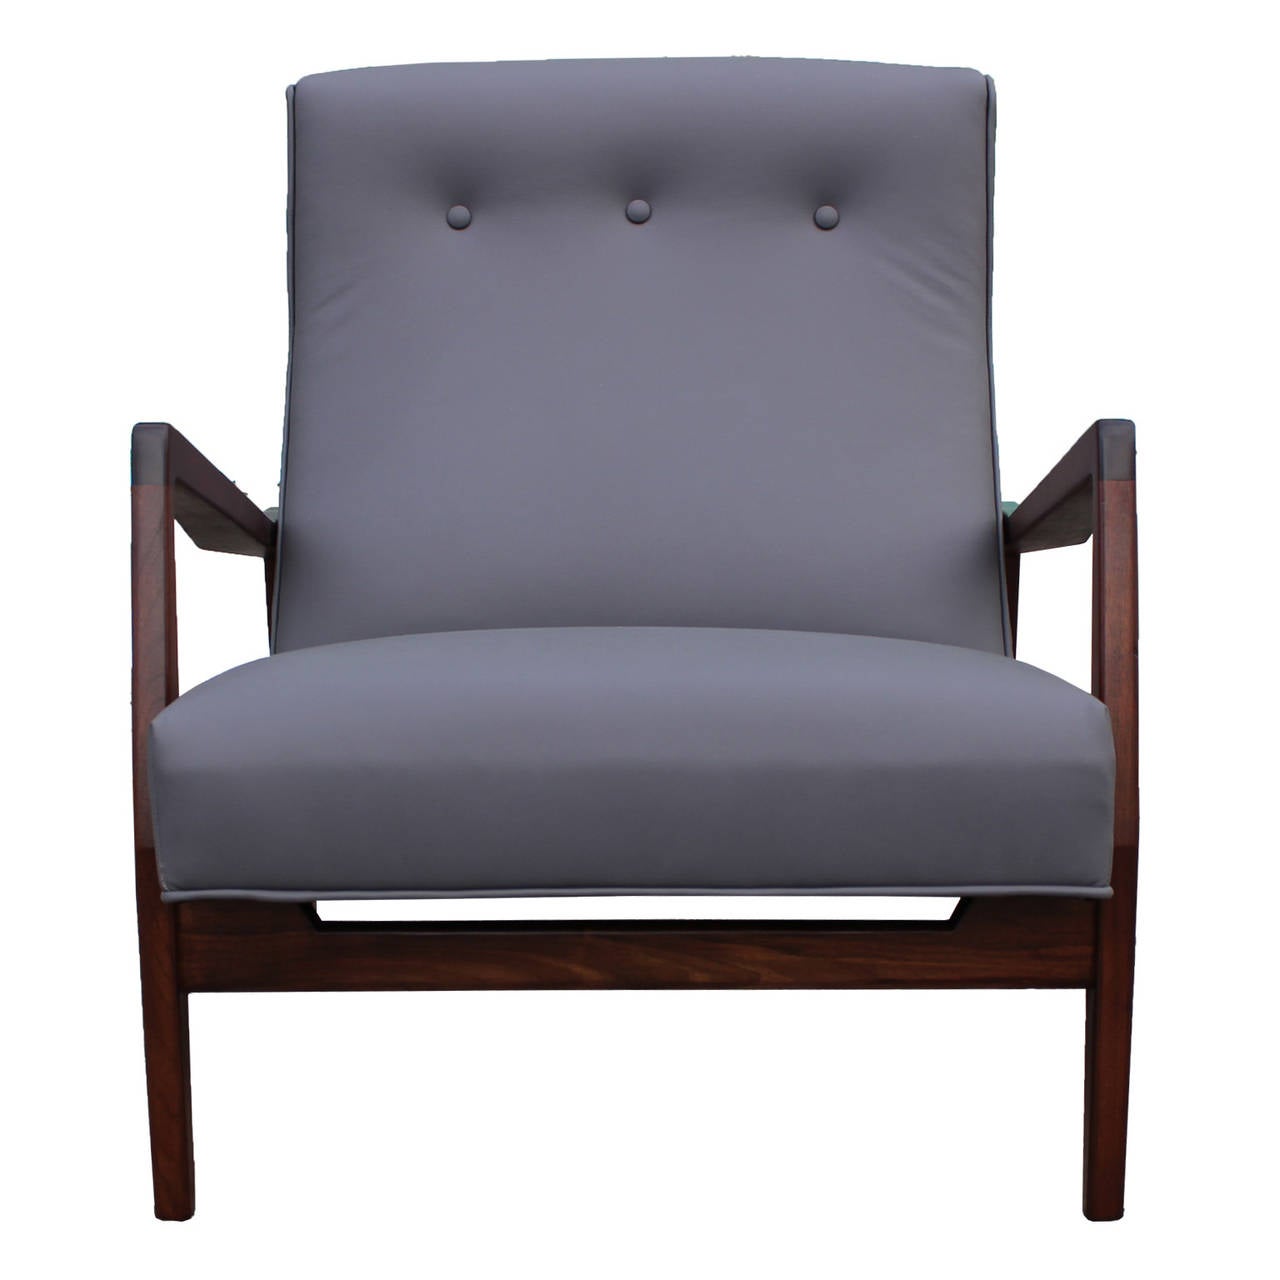 Jens Risom Grey Leather Chair and Ottoman at 1stdibs